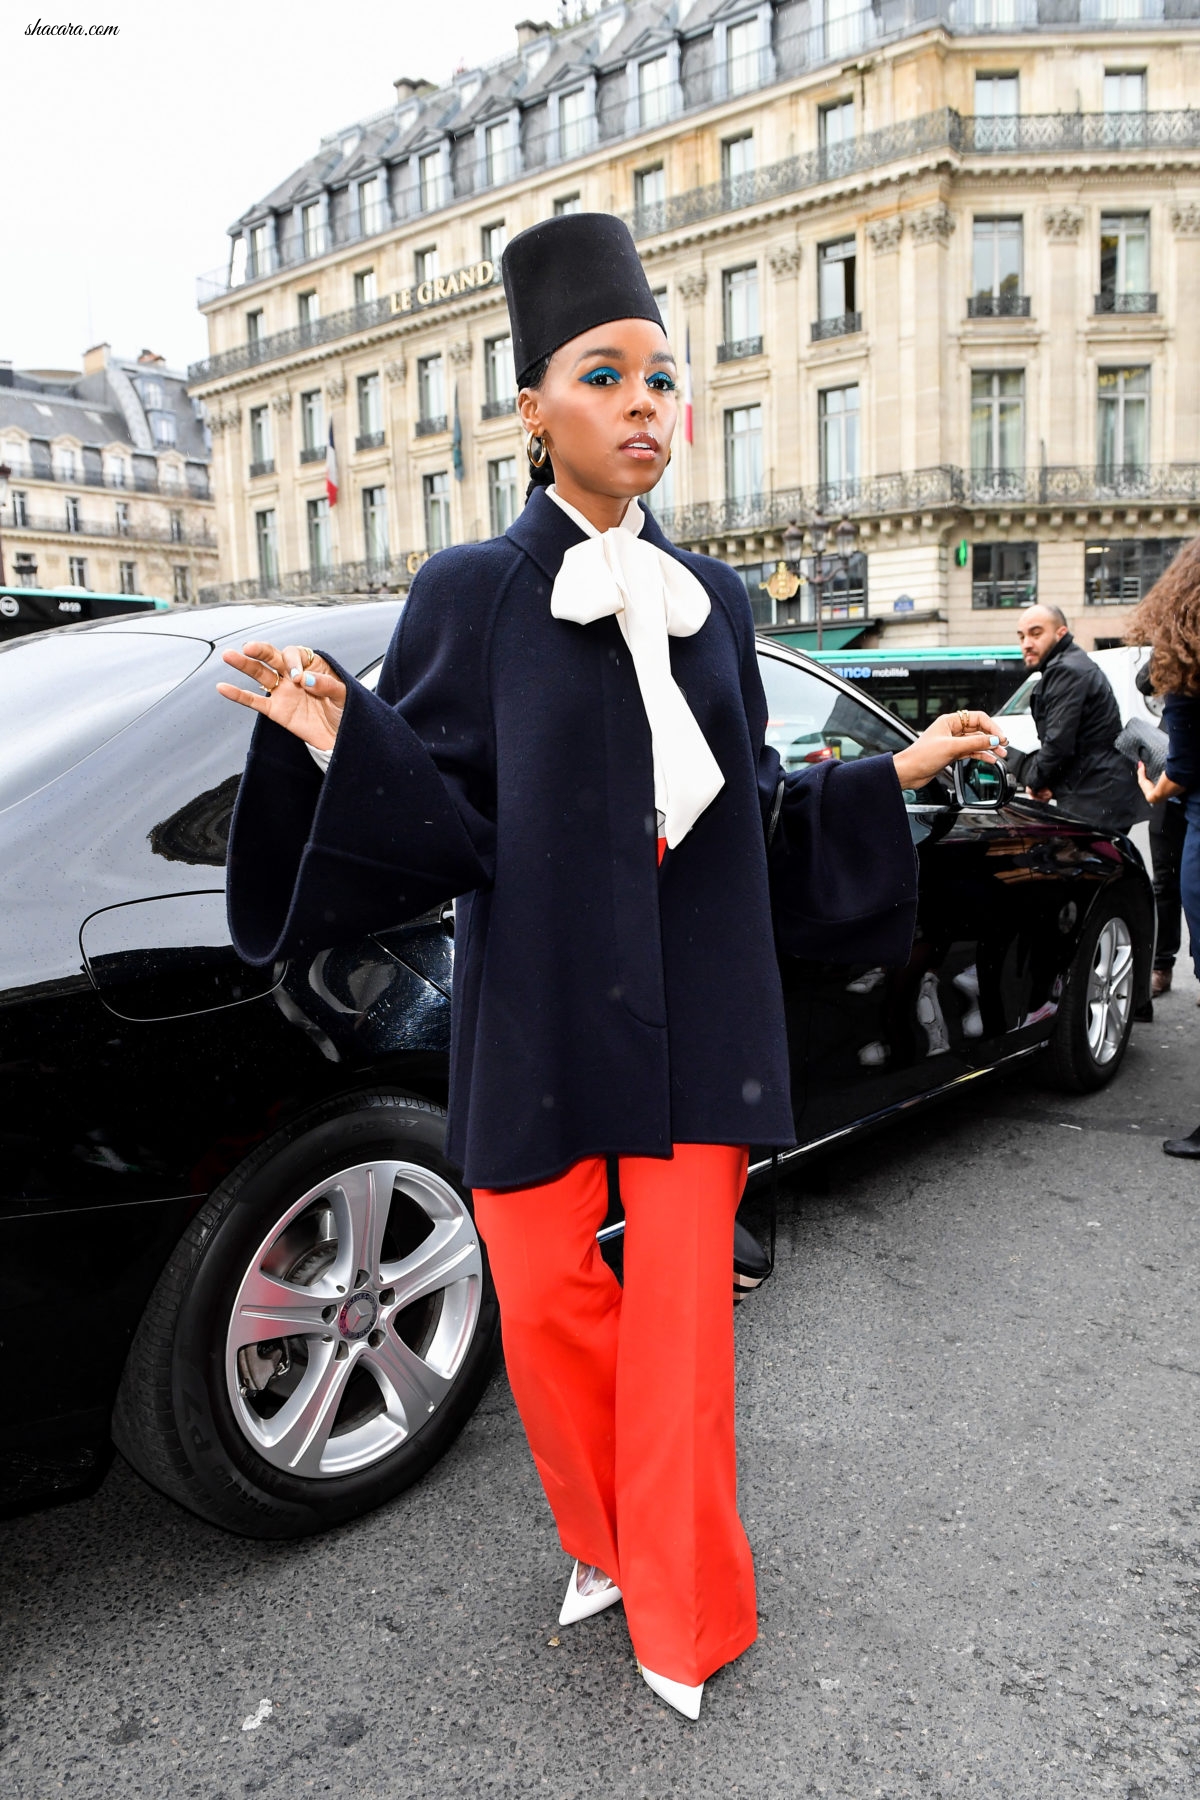 Willow Smith, Janelle Monae, Samuel L. Jackson And More Celebs Out And About